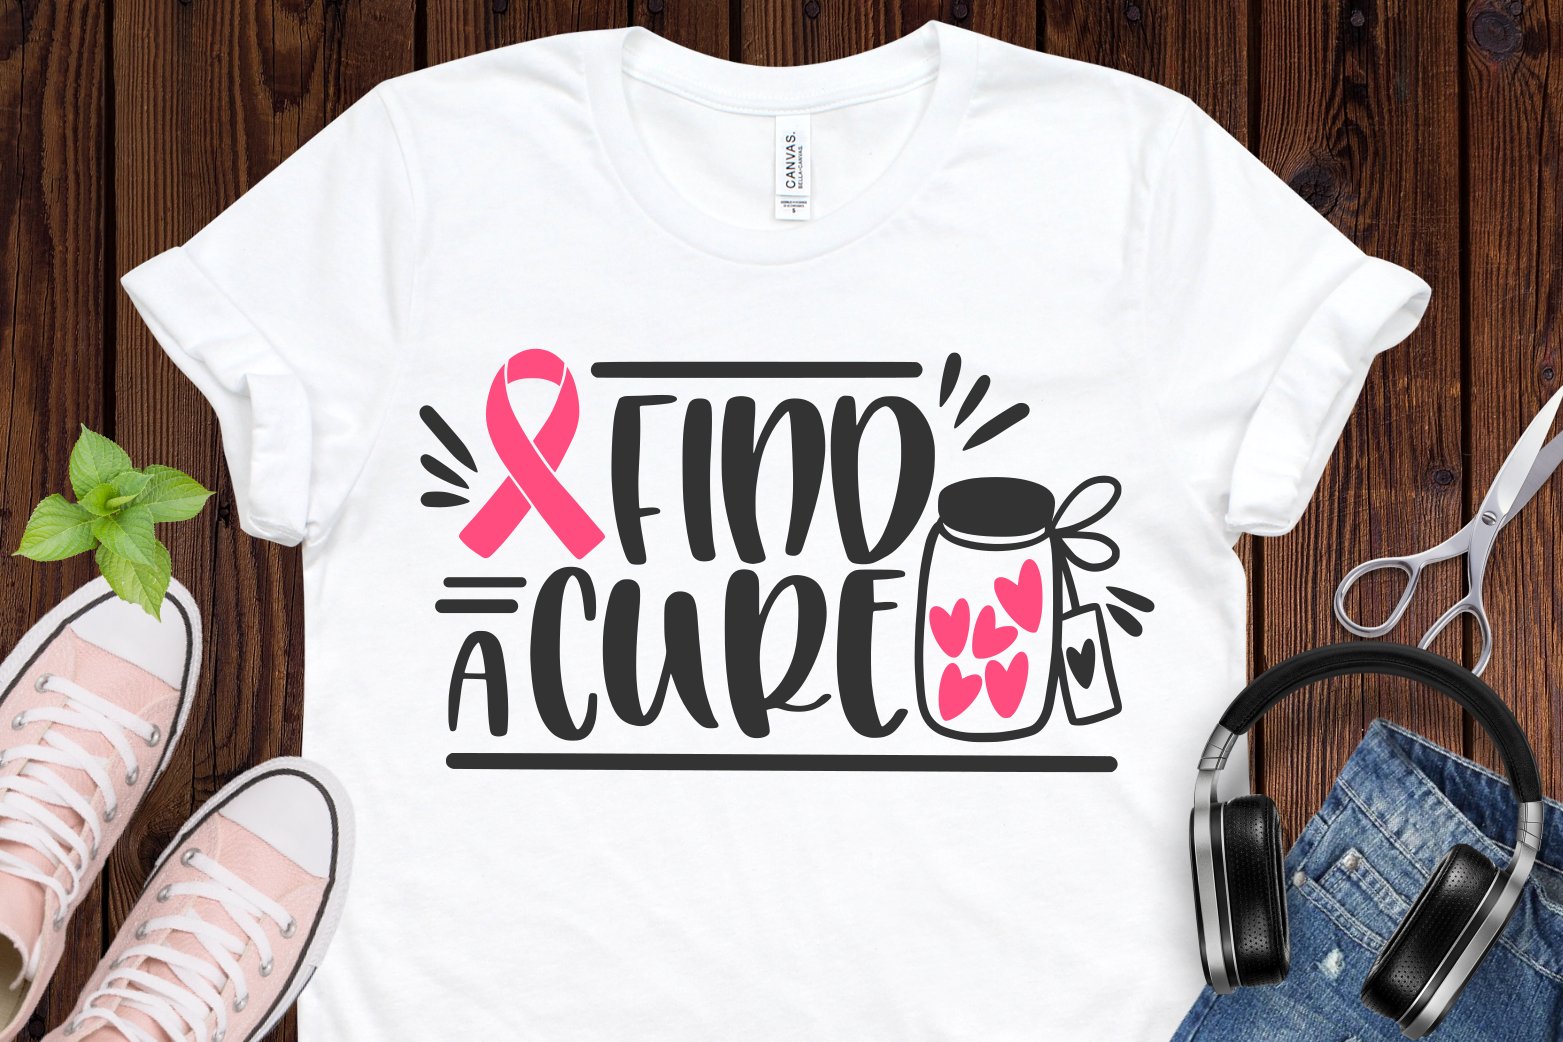 Breast cancer quote on the t-shirt.